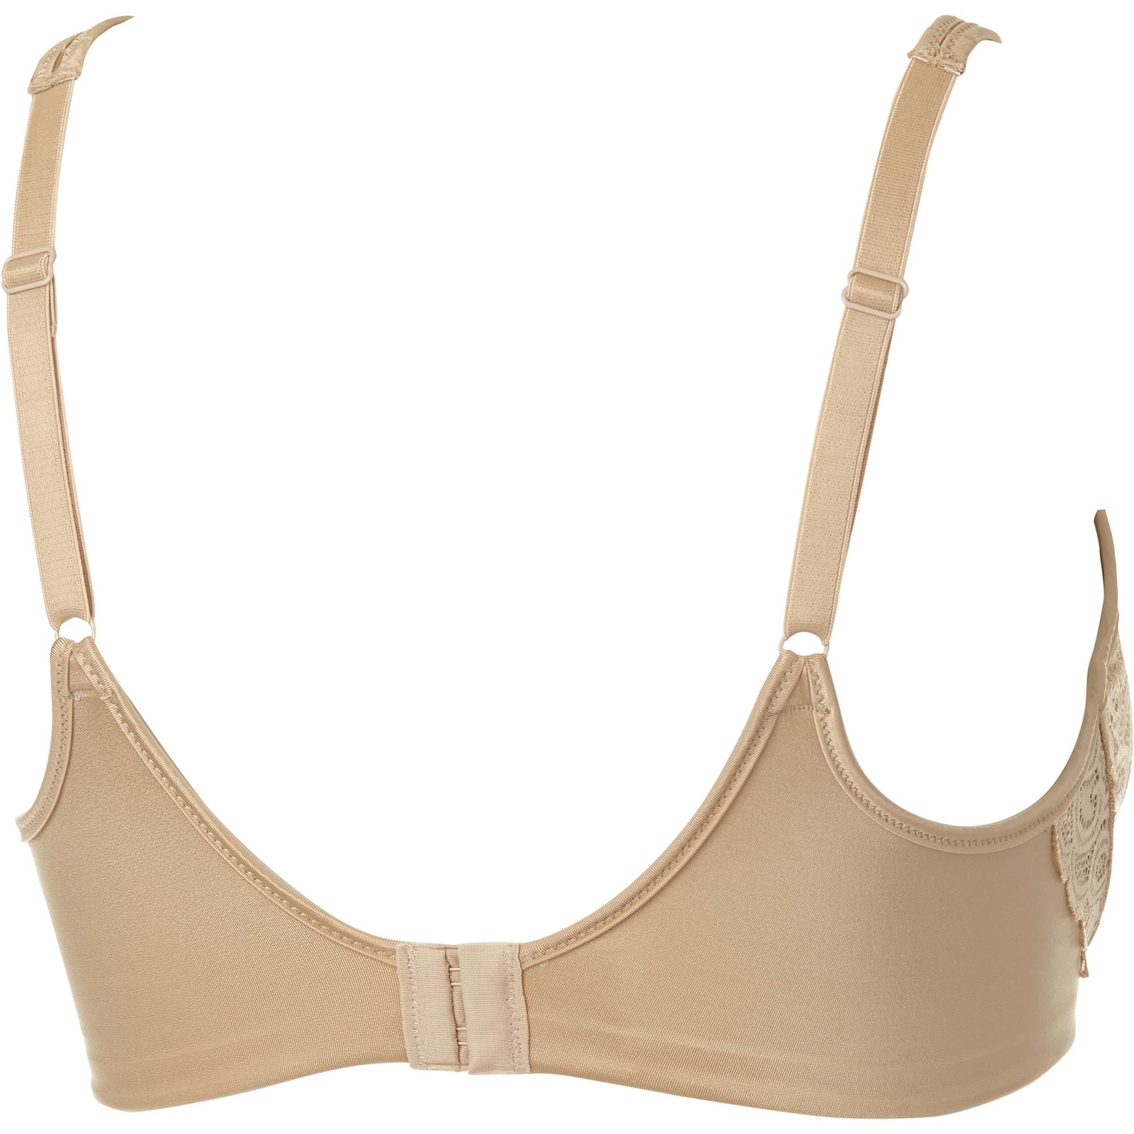 Bali Passion for Comfort Side Smooth Underwire Bra - Image 2 of 2